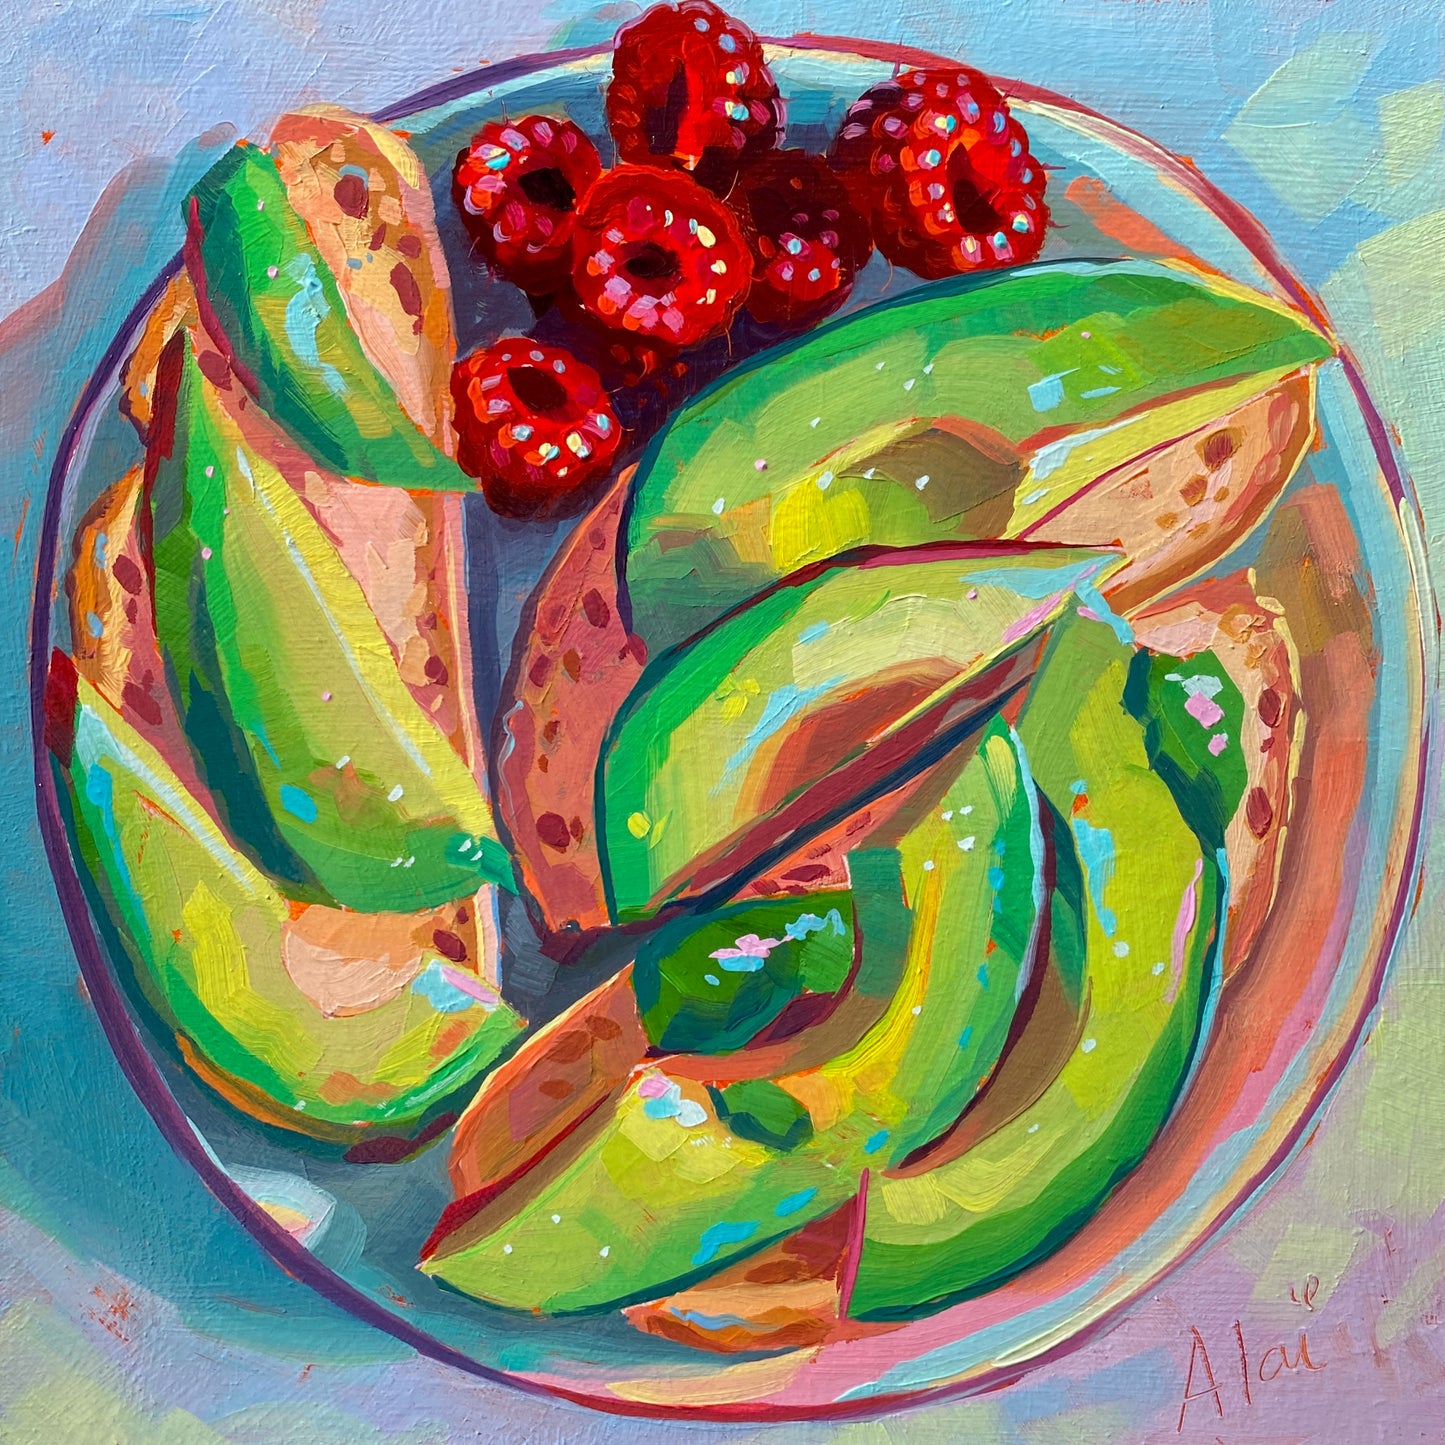 Avocado slices and berries - Oil painting Print